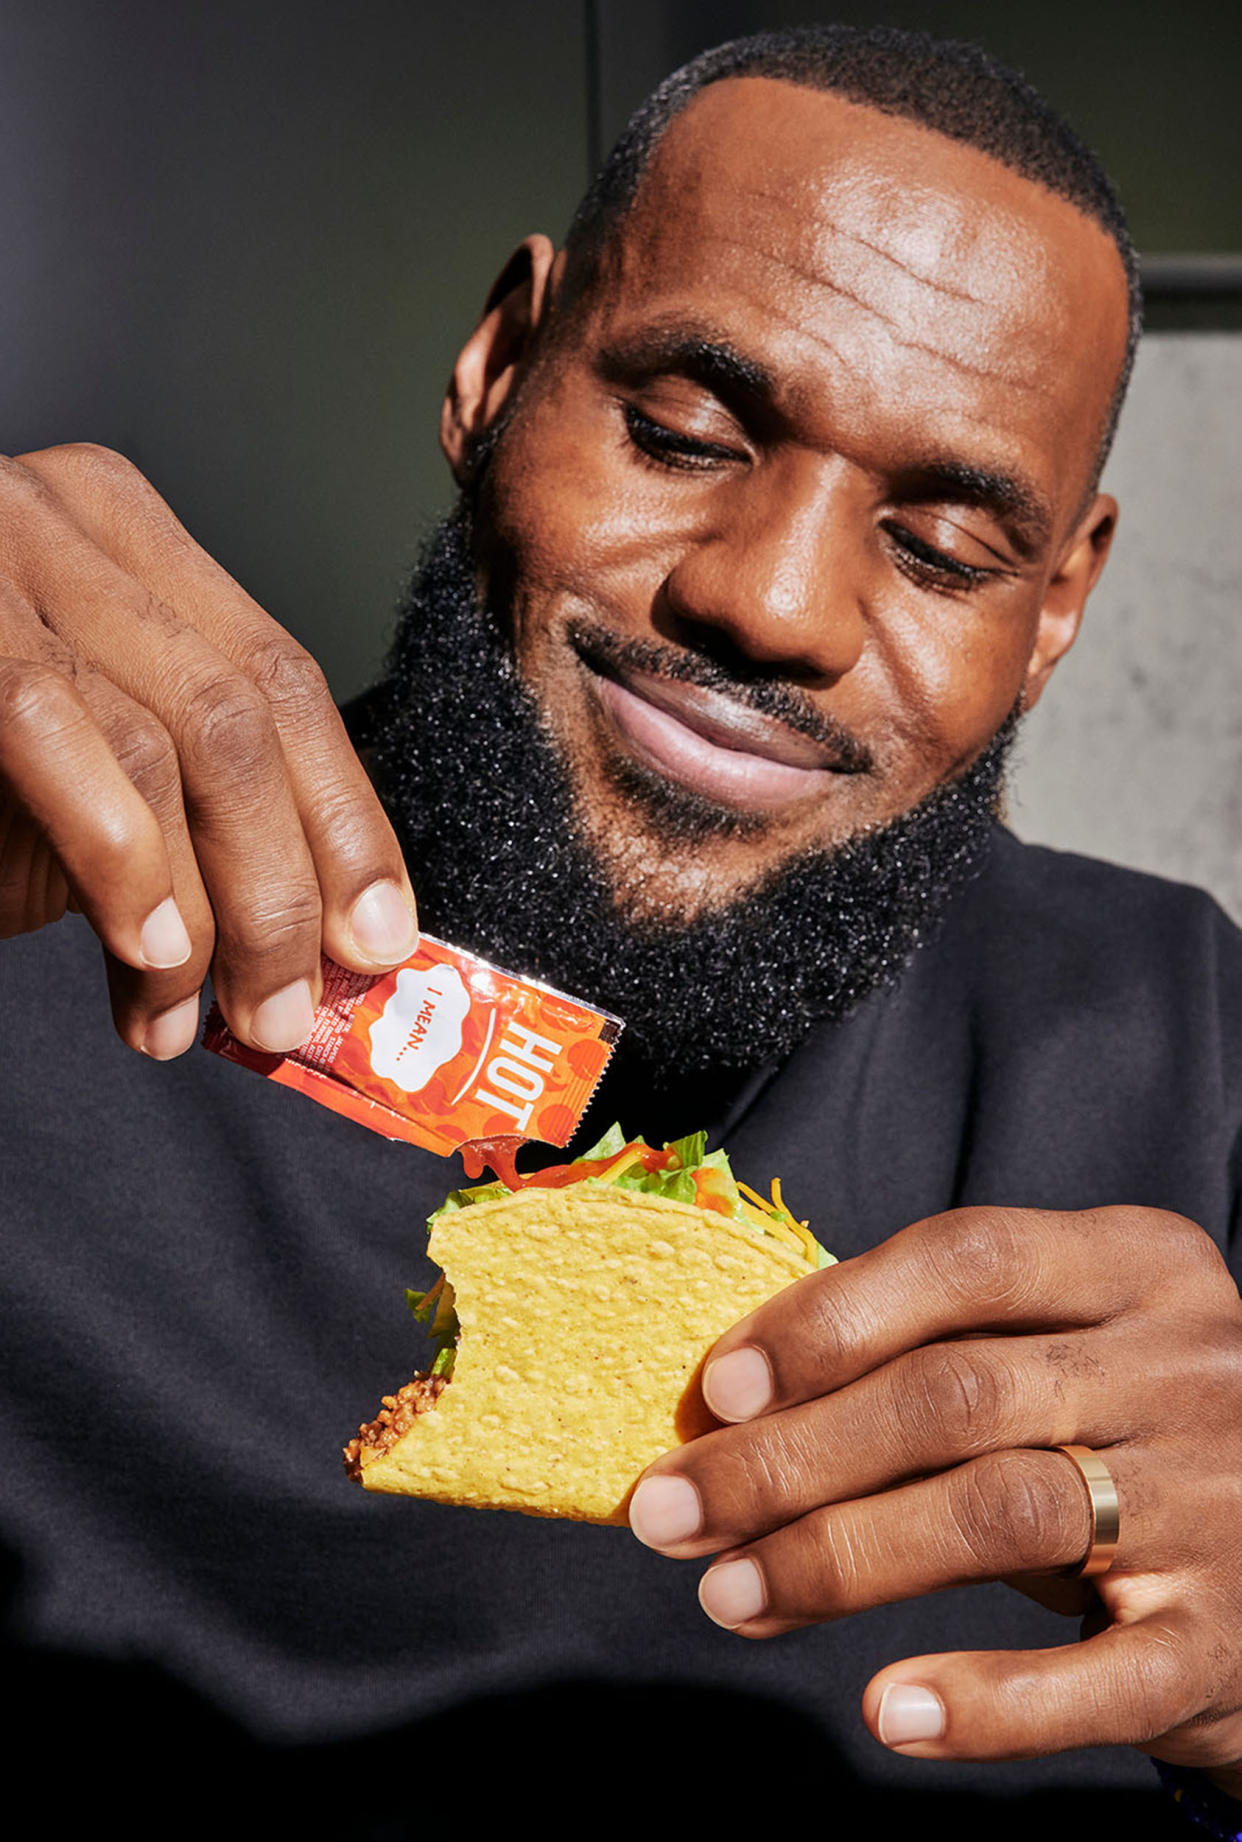 Taco Bell announces LeBron James is joining its efforts to free the 